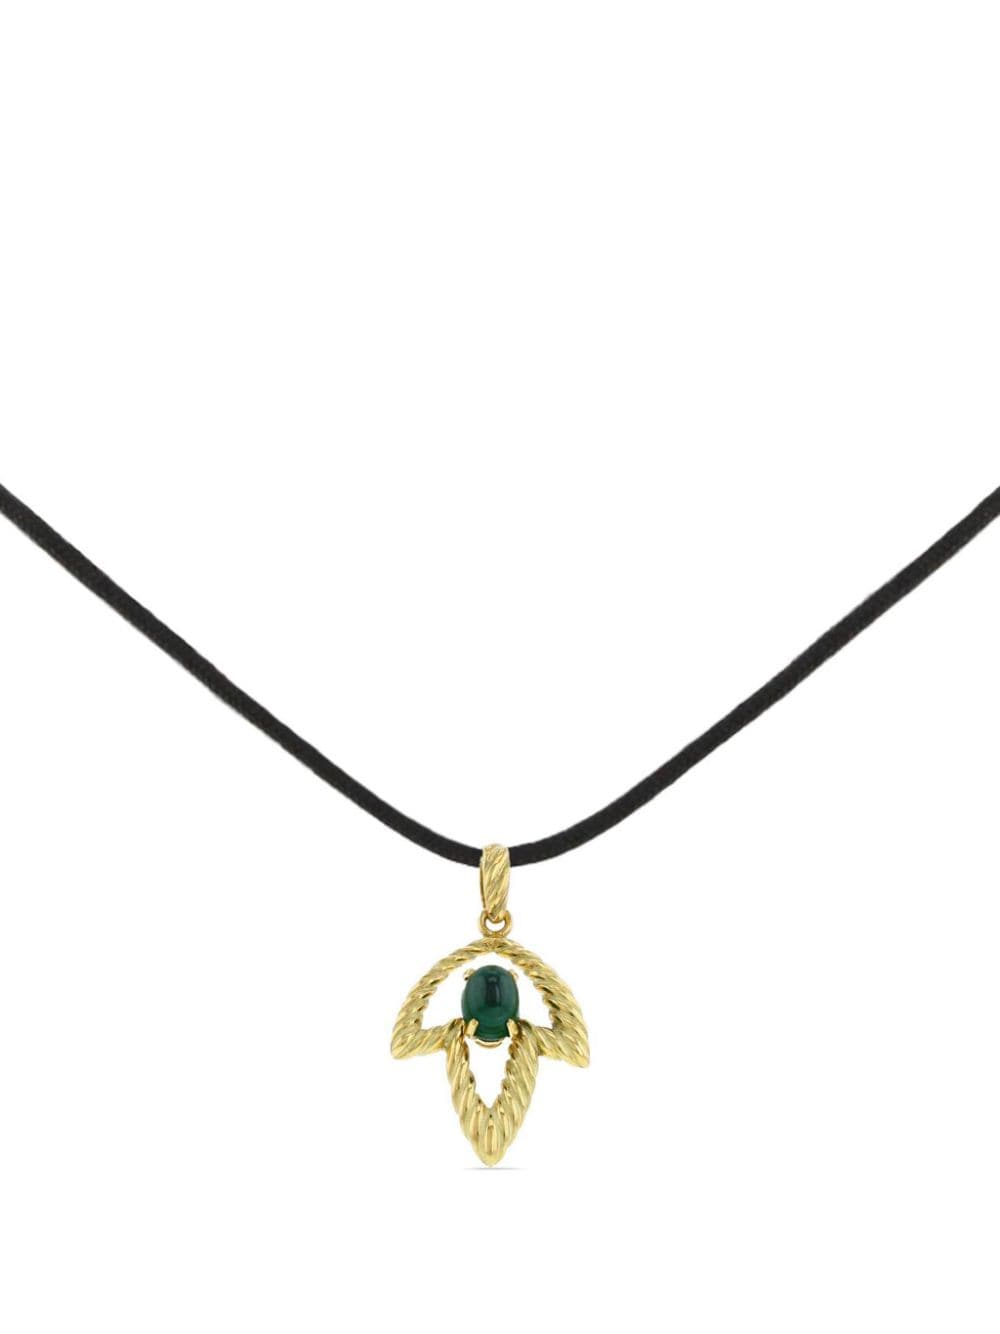 Pre-owned Chaumet 1970s 18kt Yellow Gold Malachite Pendant Charm